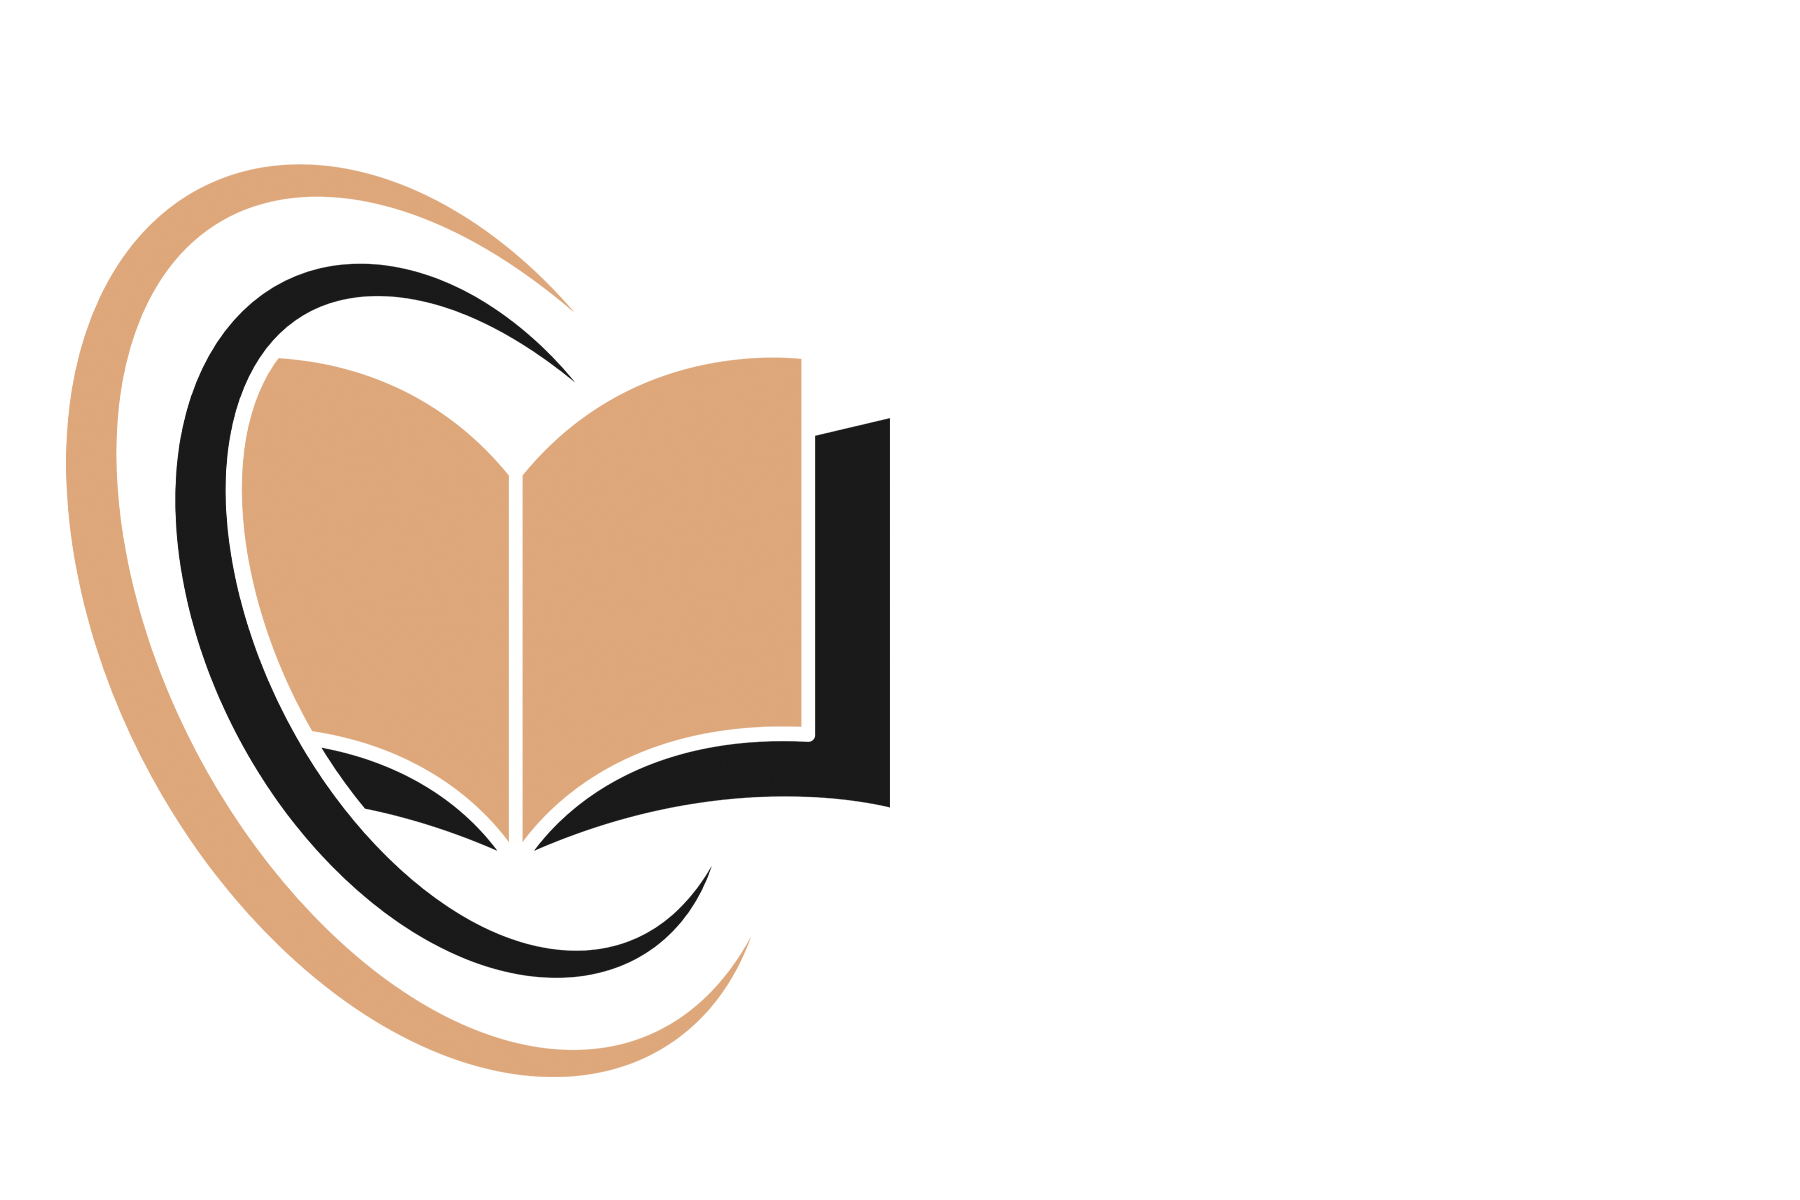 upcoming book tours